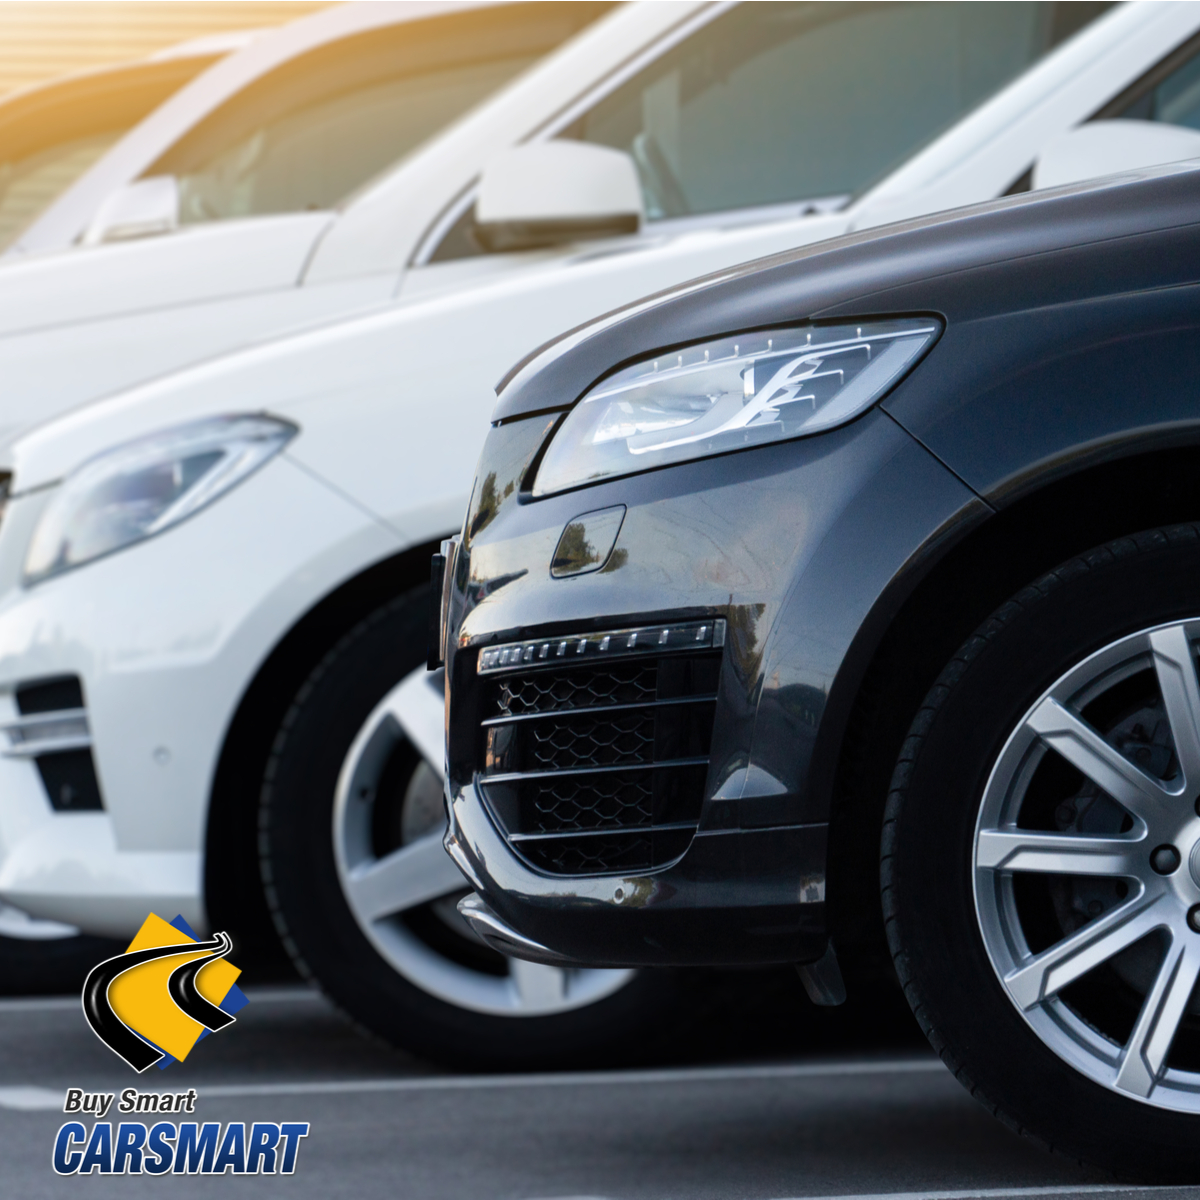 Shopping for a Used Car Should Be a Positive Experience!